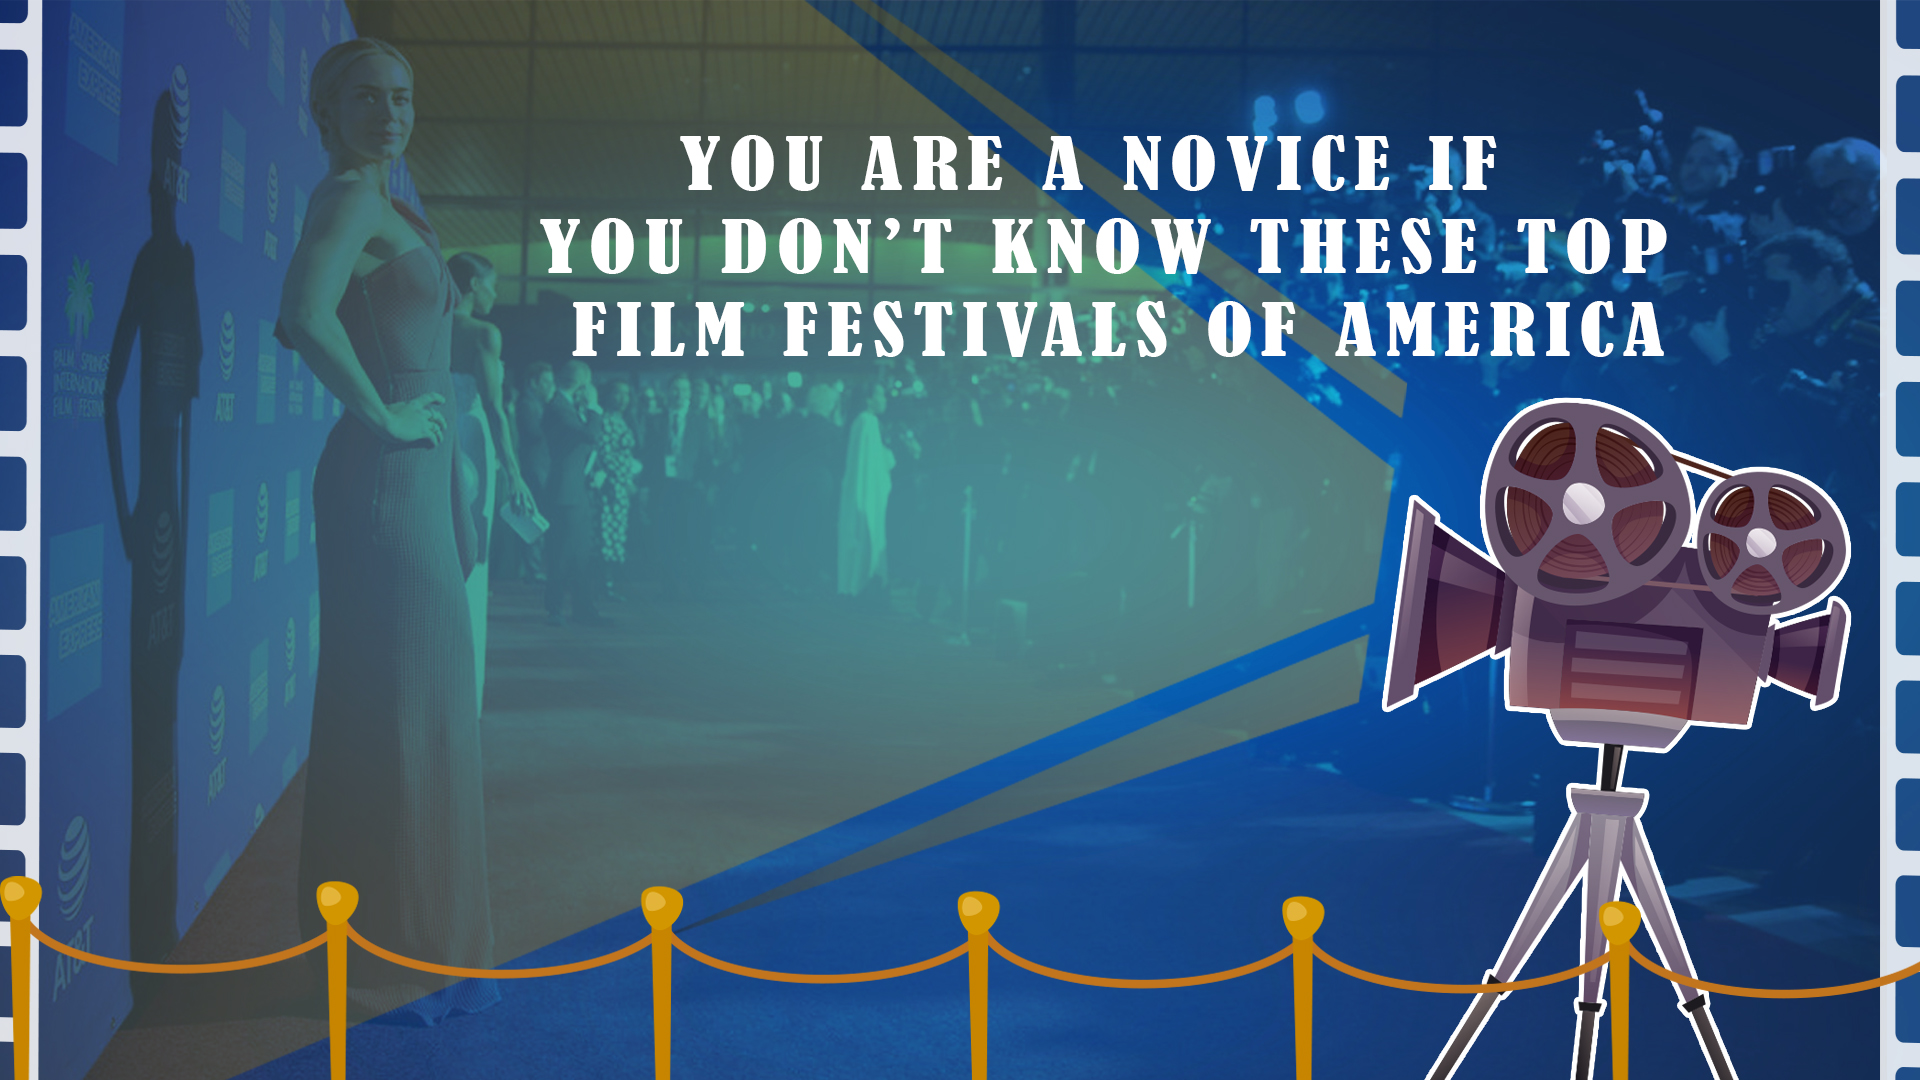 You are a novice if you don’t know these top film festivals of America